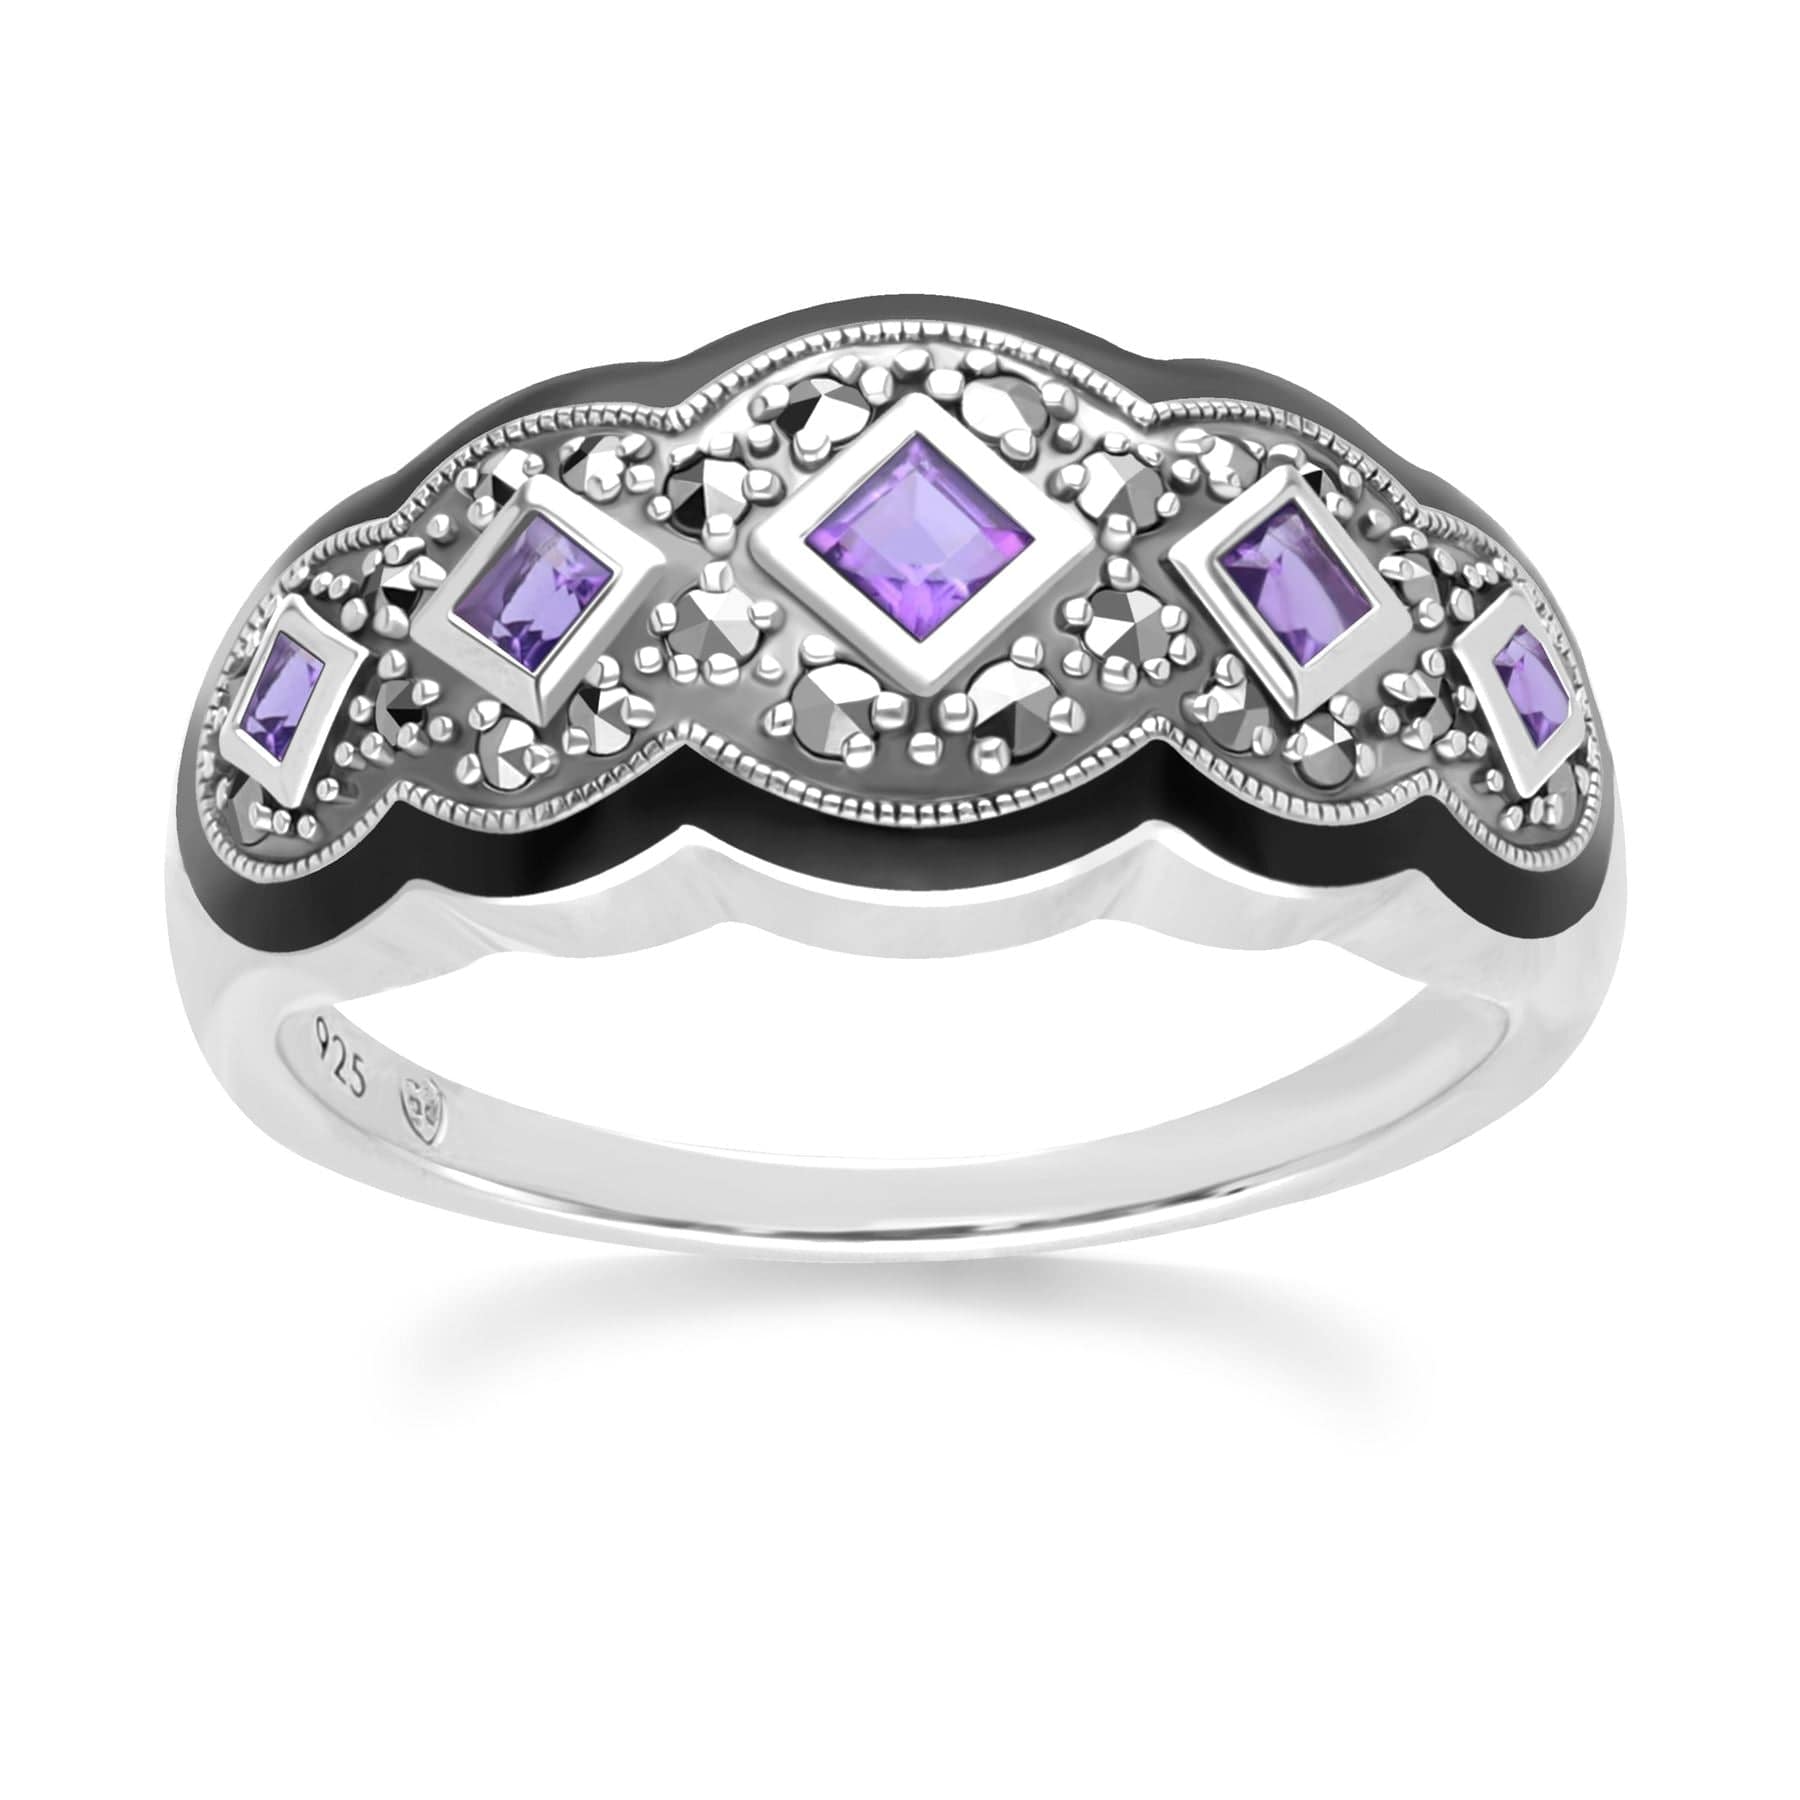 Art Deco Style Square Amethyst Five Stone and Marcasite Ring in Sterling Silver 214R642102925 